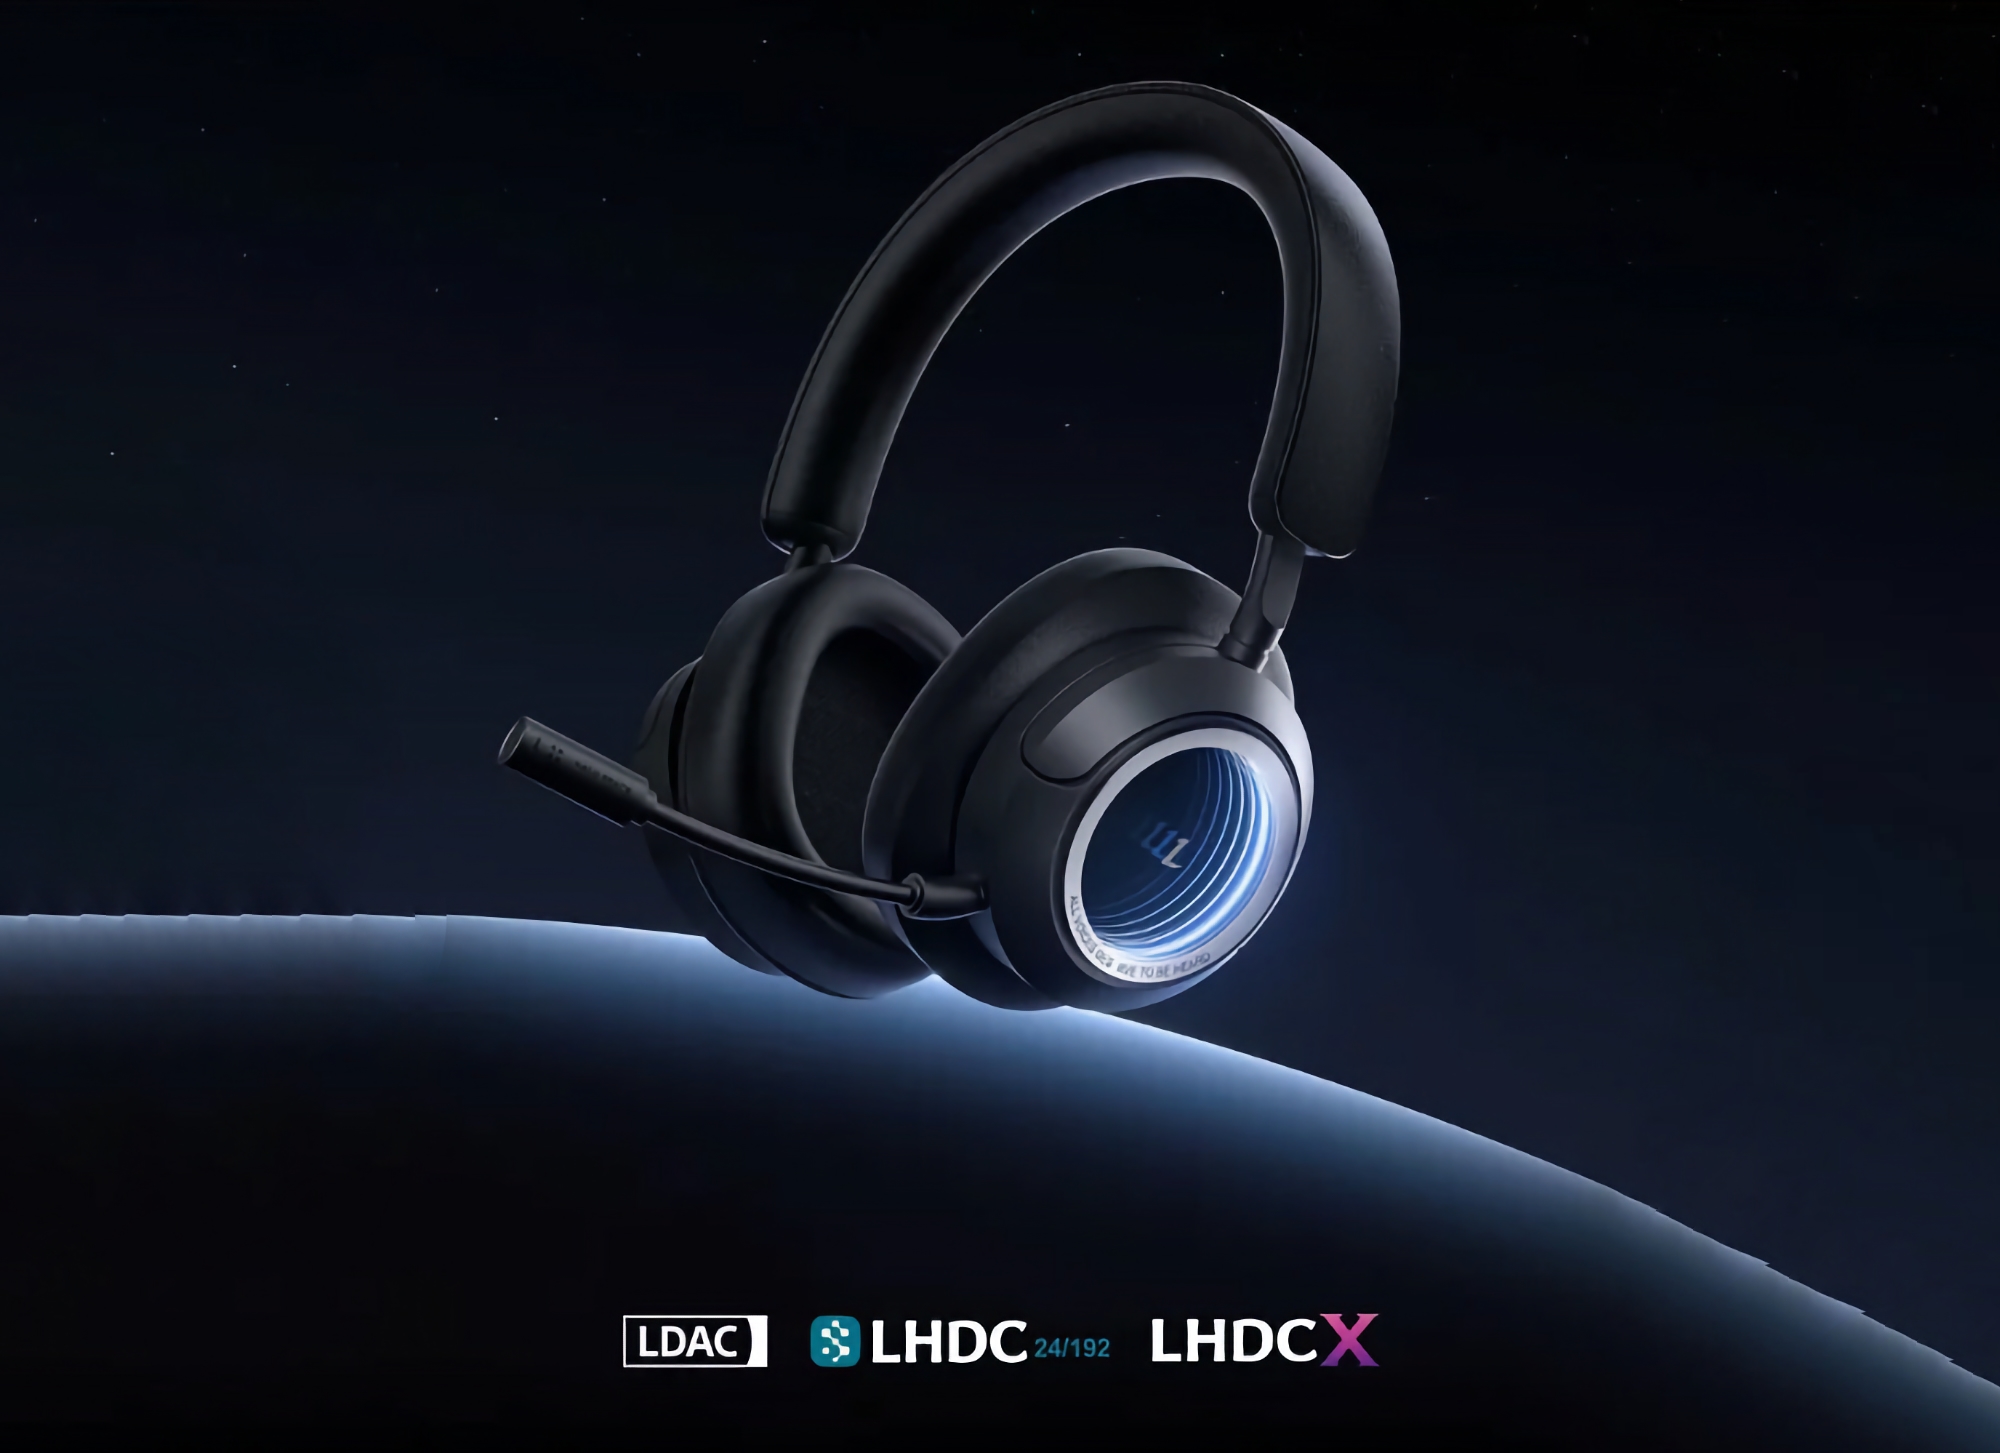 Edifier announced Huazai Halo Space: headphones with Spatial Audio, ANC and up to 50 hours of battery life for $120